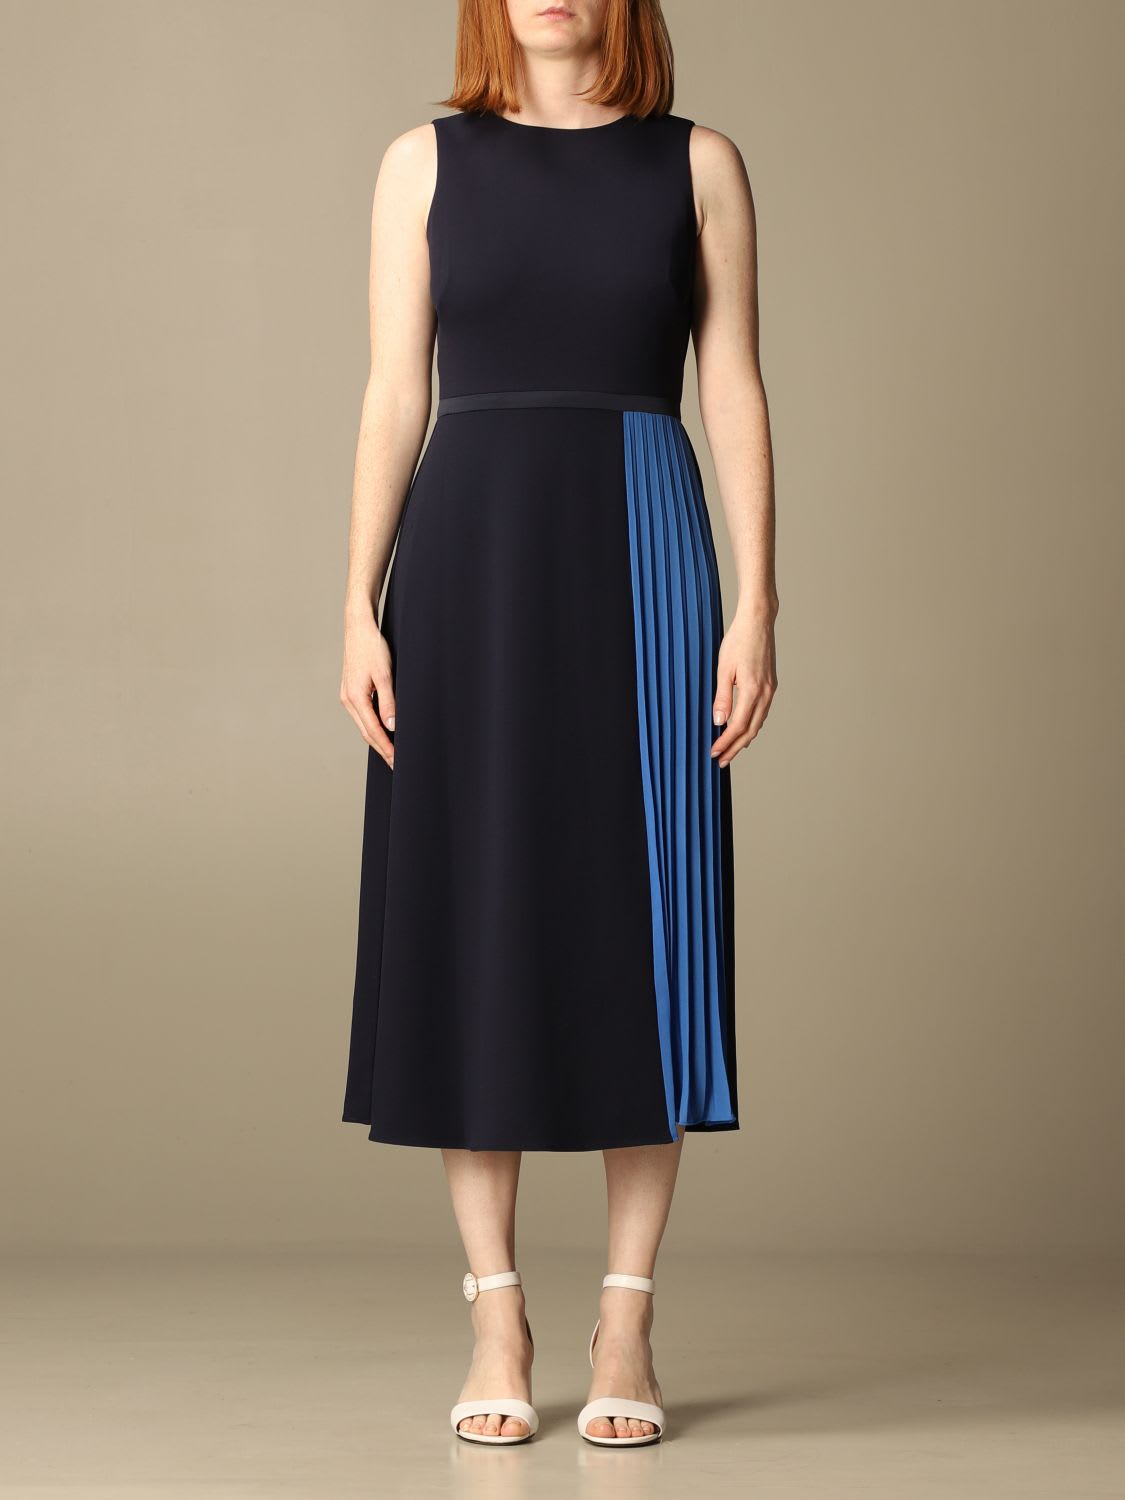 Lauren Ralph Lauren Dress Lauren Ralph Lauren Midi Dress With Pleated Panels